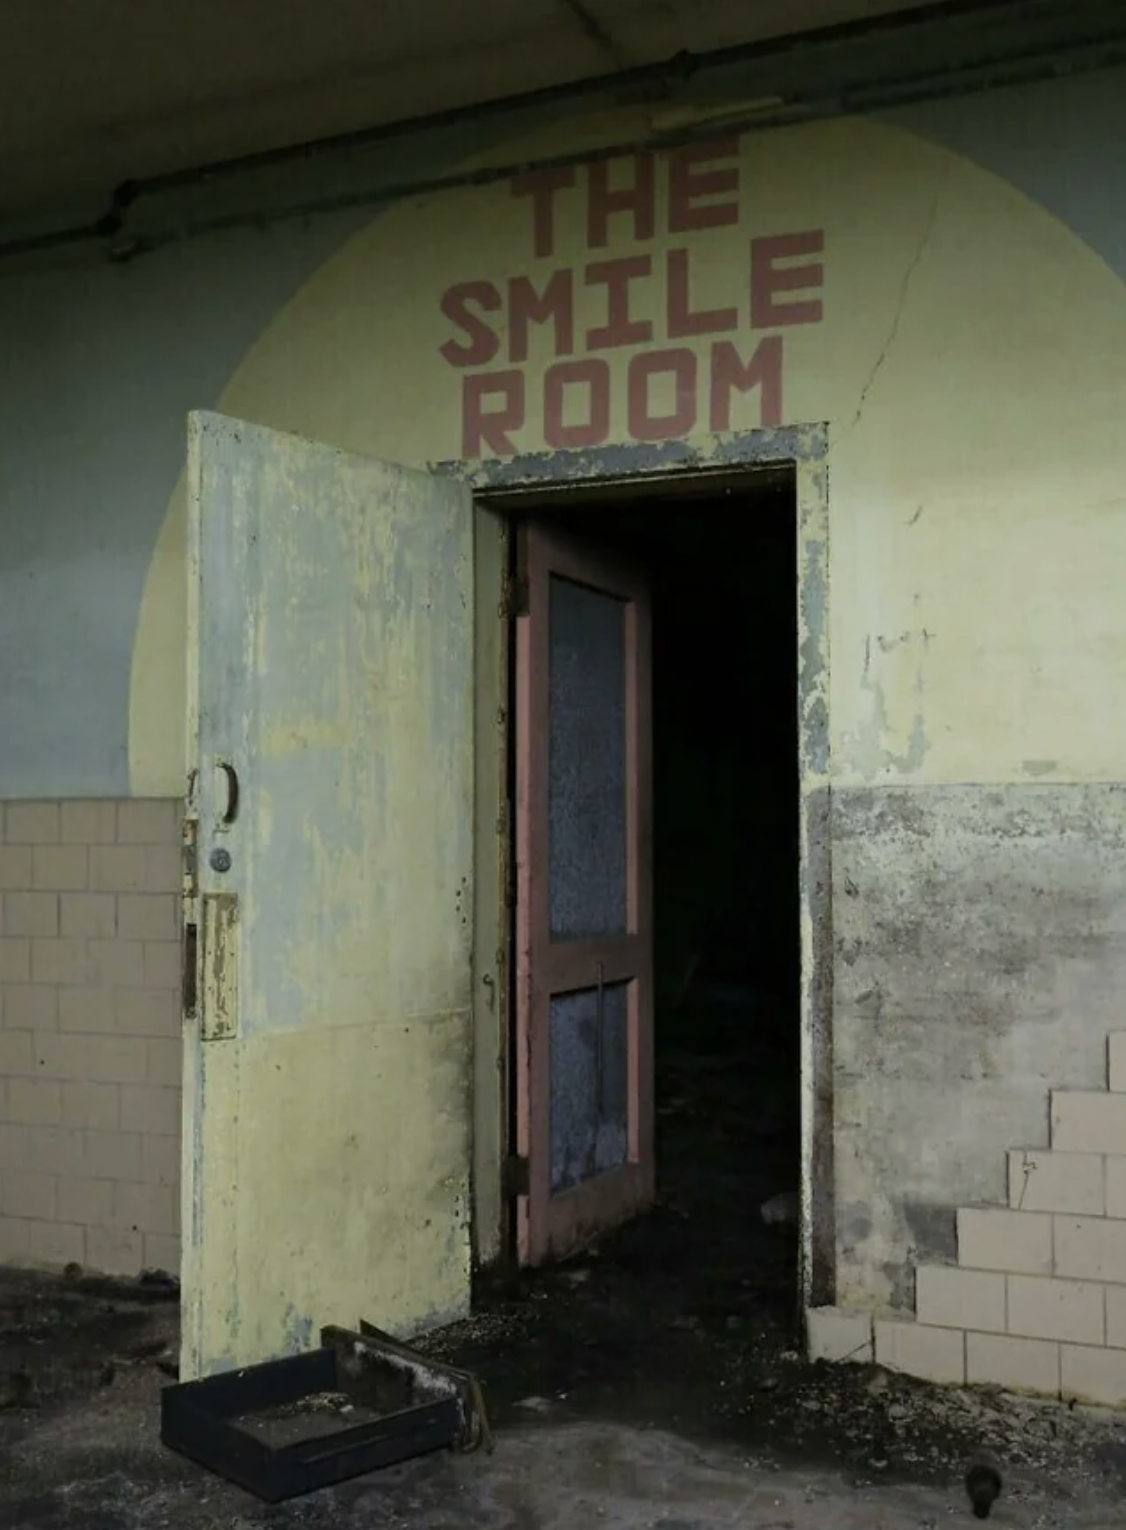 creepy abandoned building with a door open to the smile room